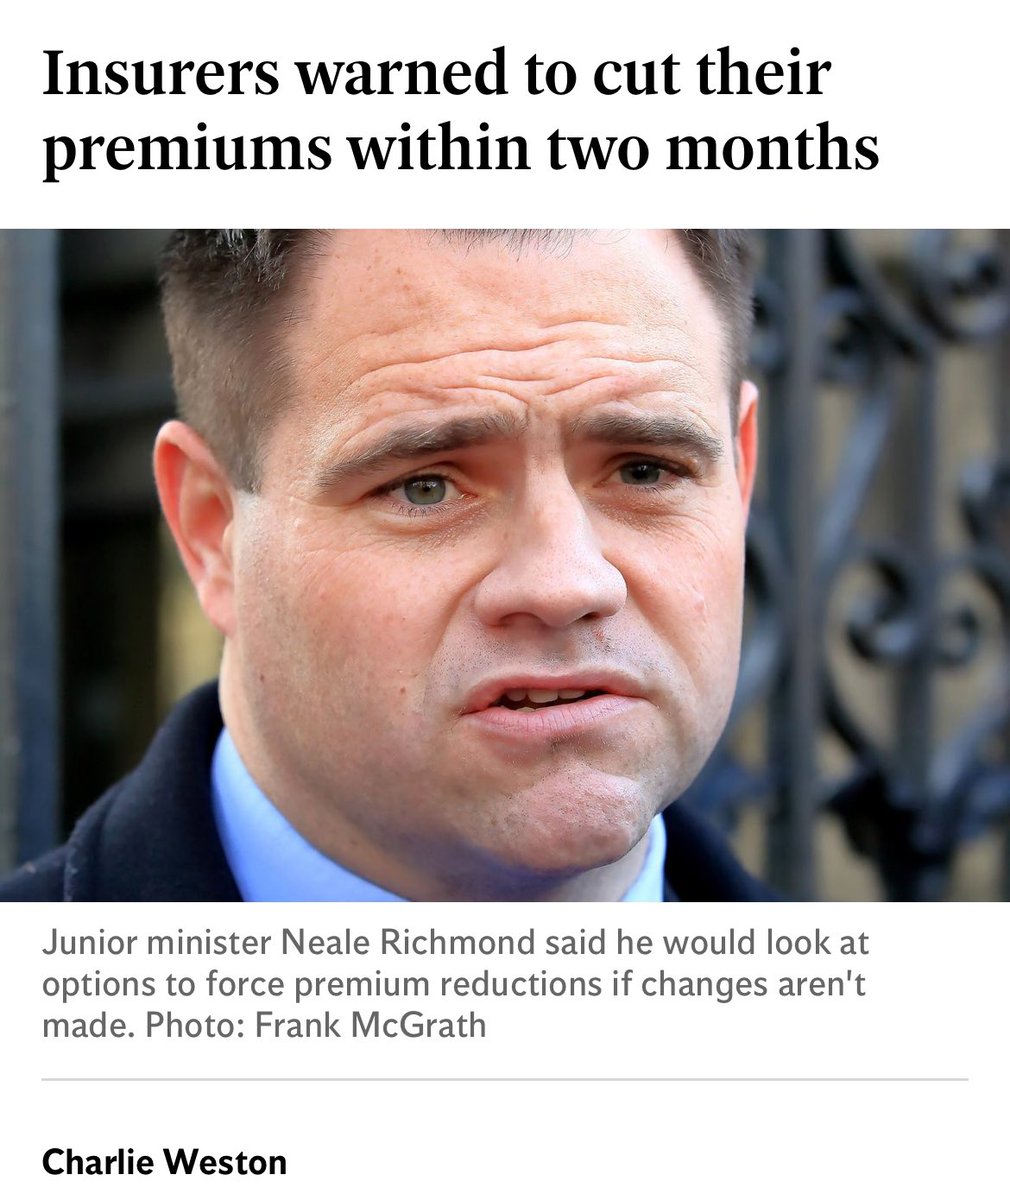 “Insurance industry bosses have been given two months to cut premiums after being summoned to a government minister’s office and told to pass on savings to consumers and businesses.”

#InsuranceReform 

independent.ie/irish-news/ins…